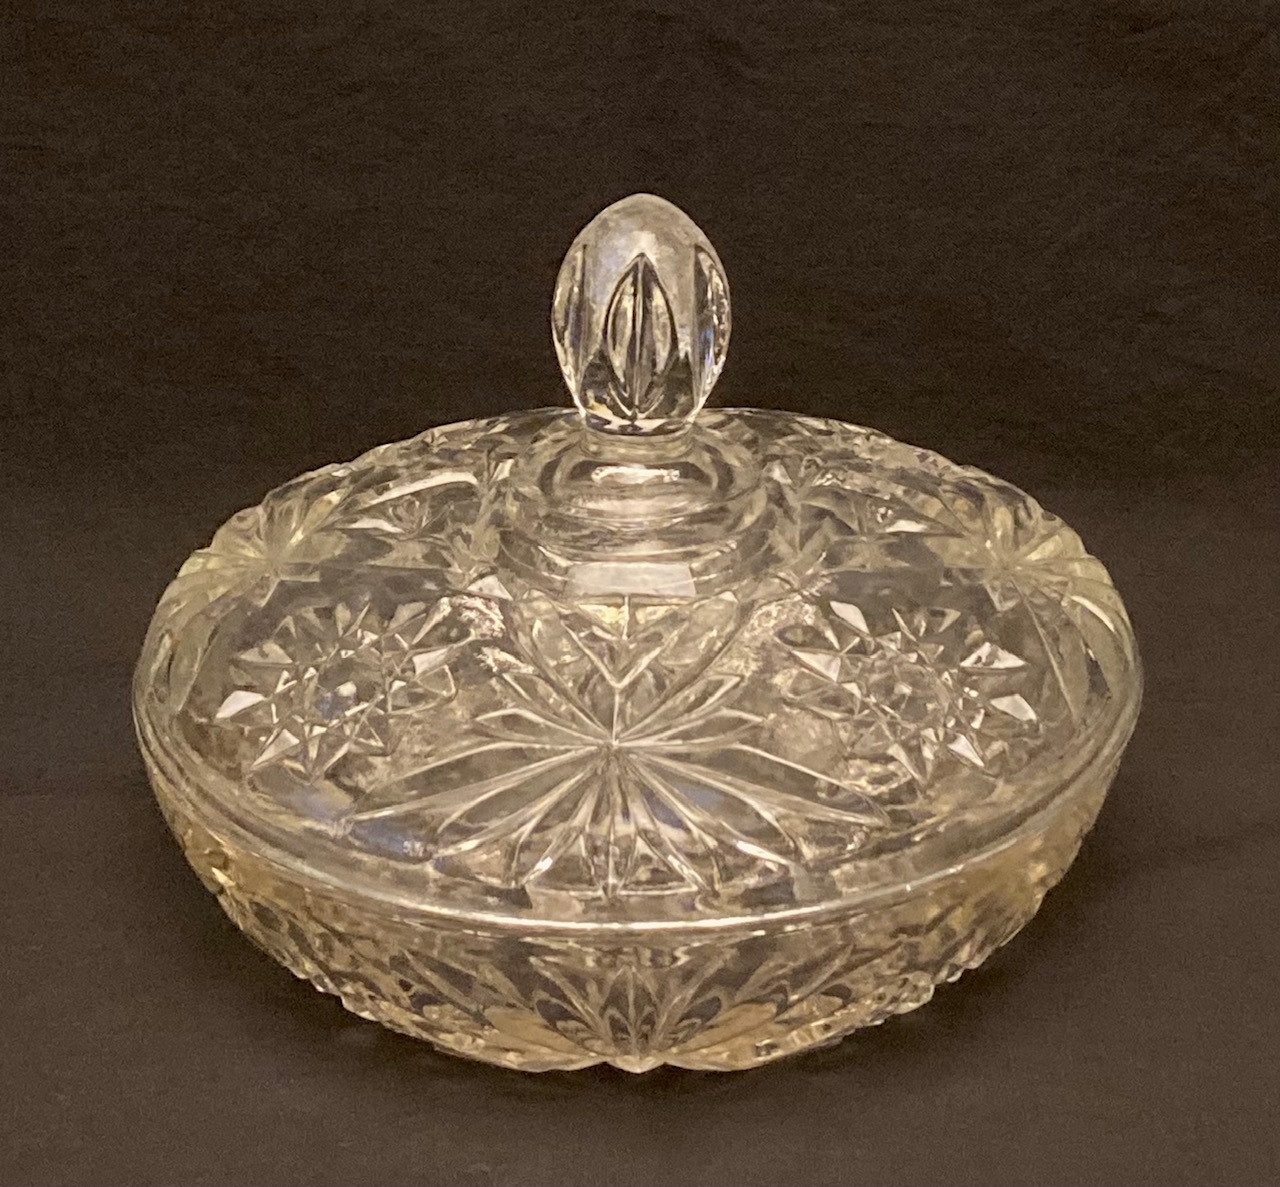 Primary image for Vintage Anchor Hocking Early American Prescut large candy dish with lid EAPC